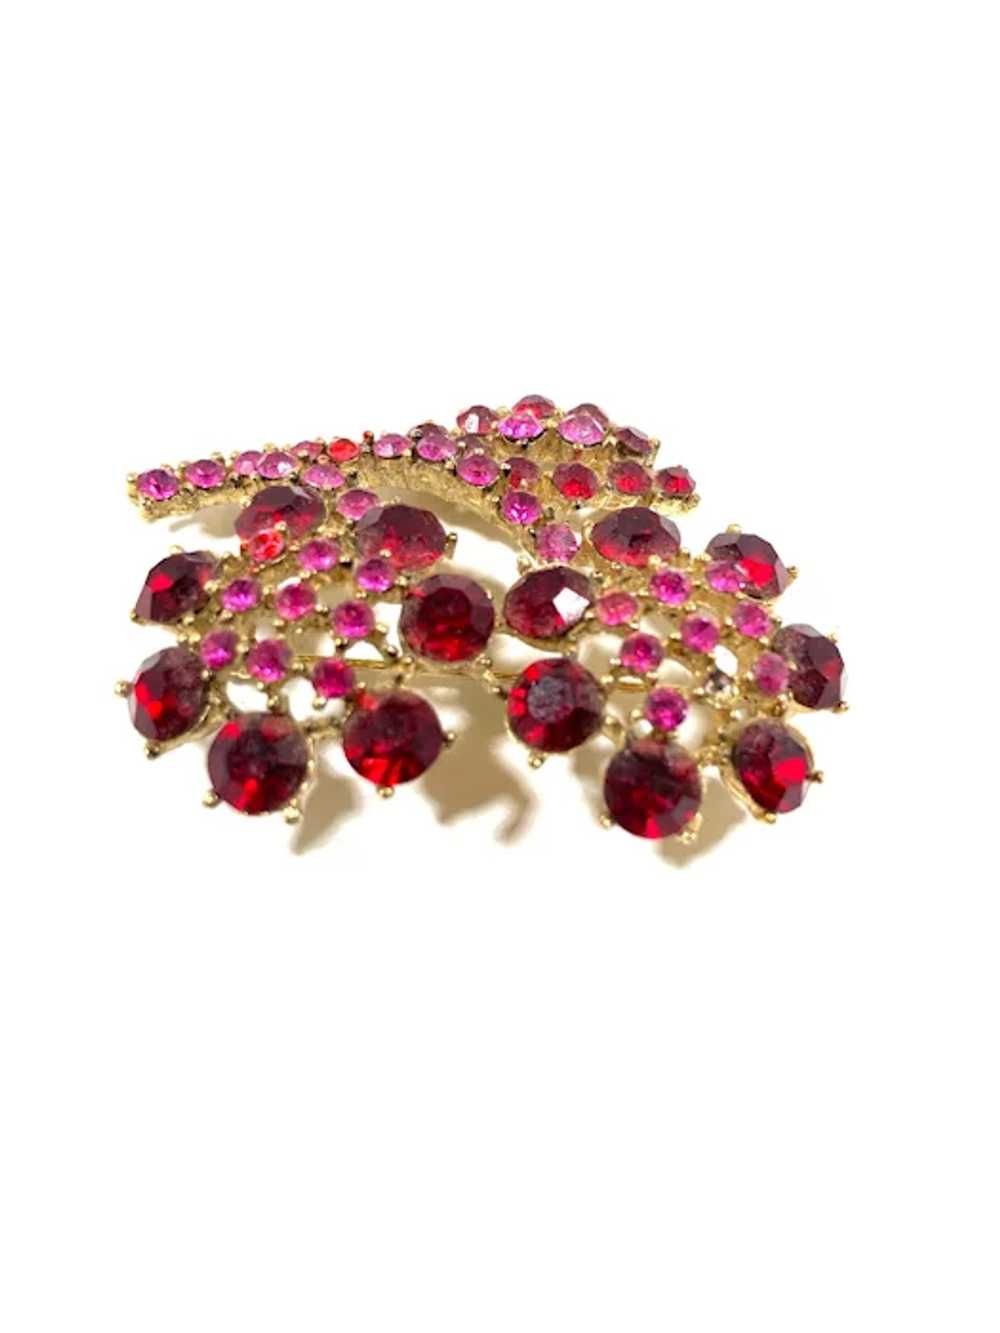 Red and Pink Rhinestone Floral Bouquet Brooch - image 4